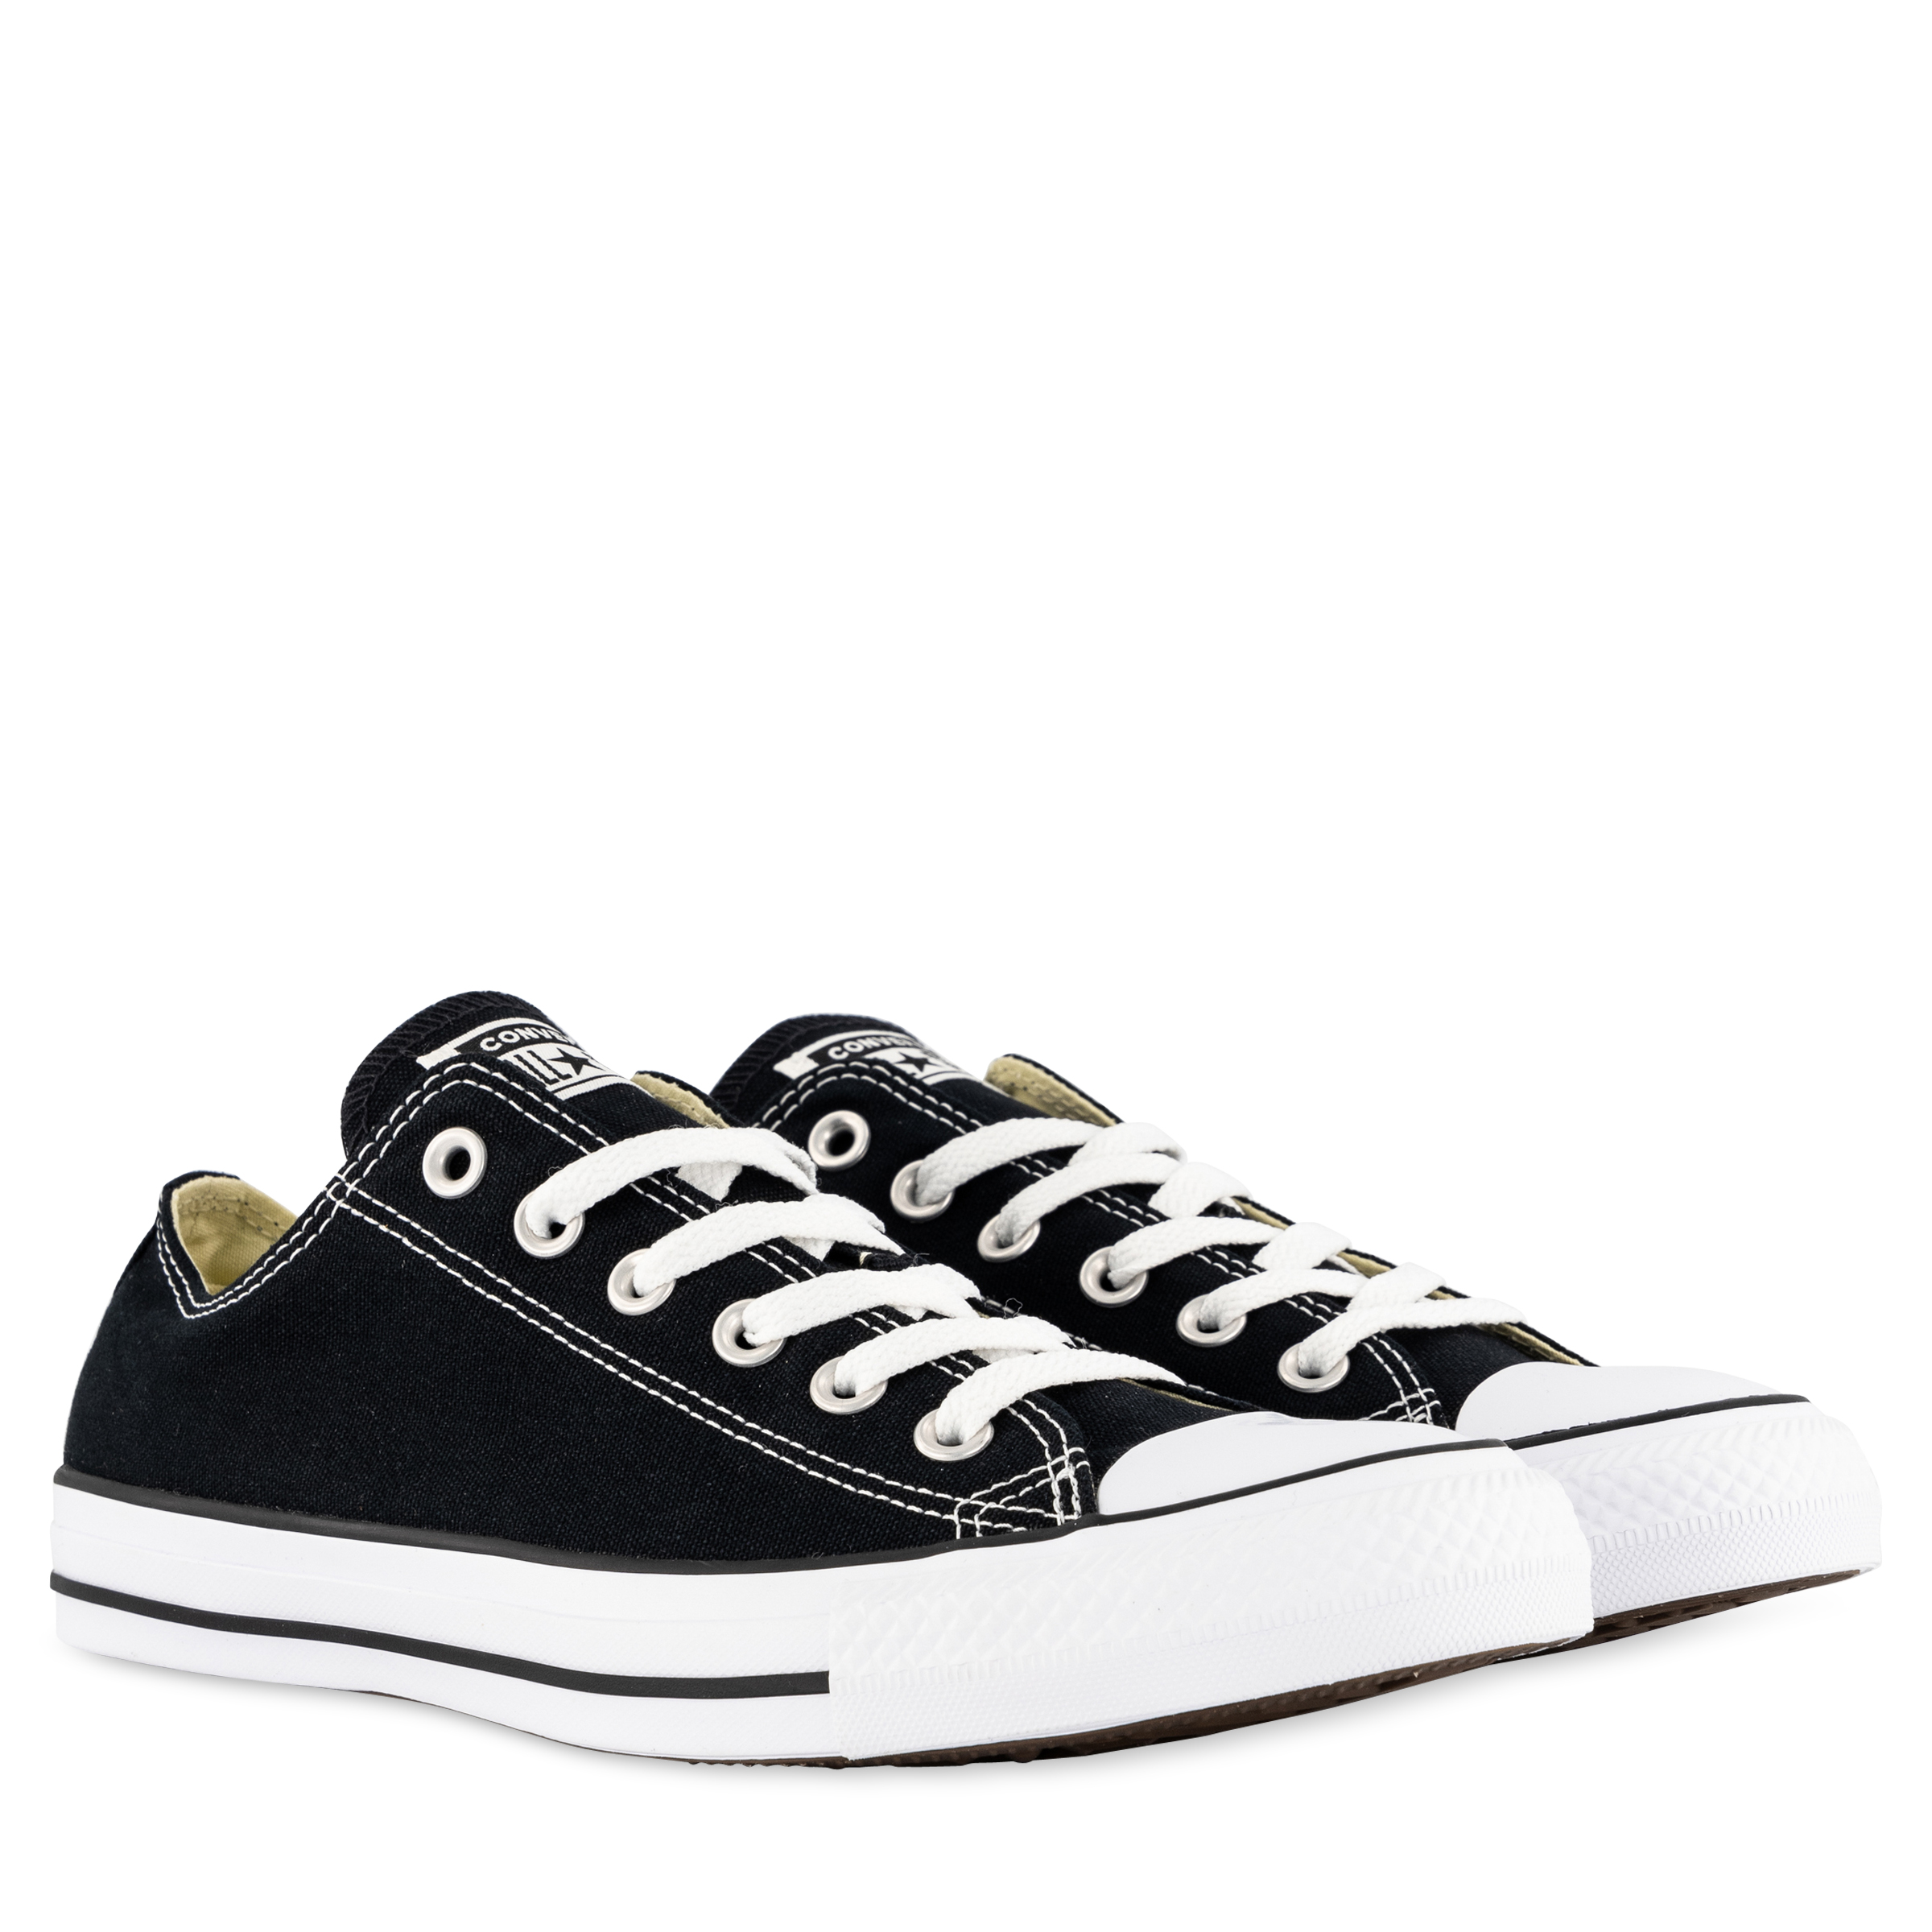 Converse All Star Low Black | Hype DC